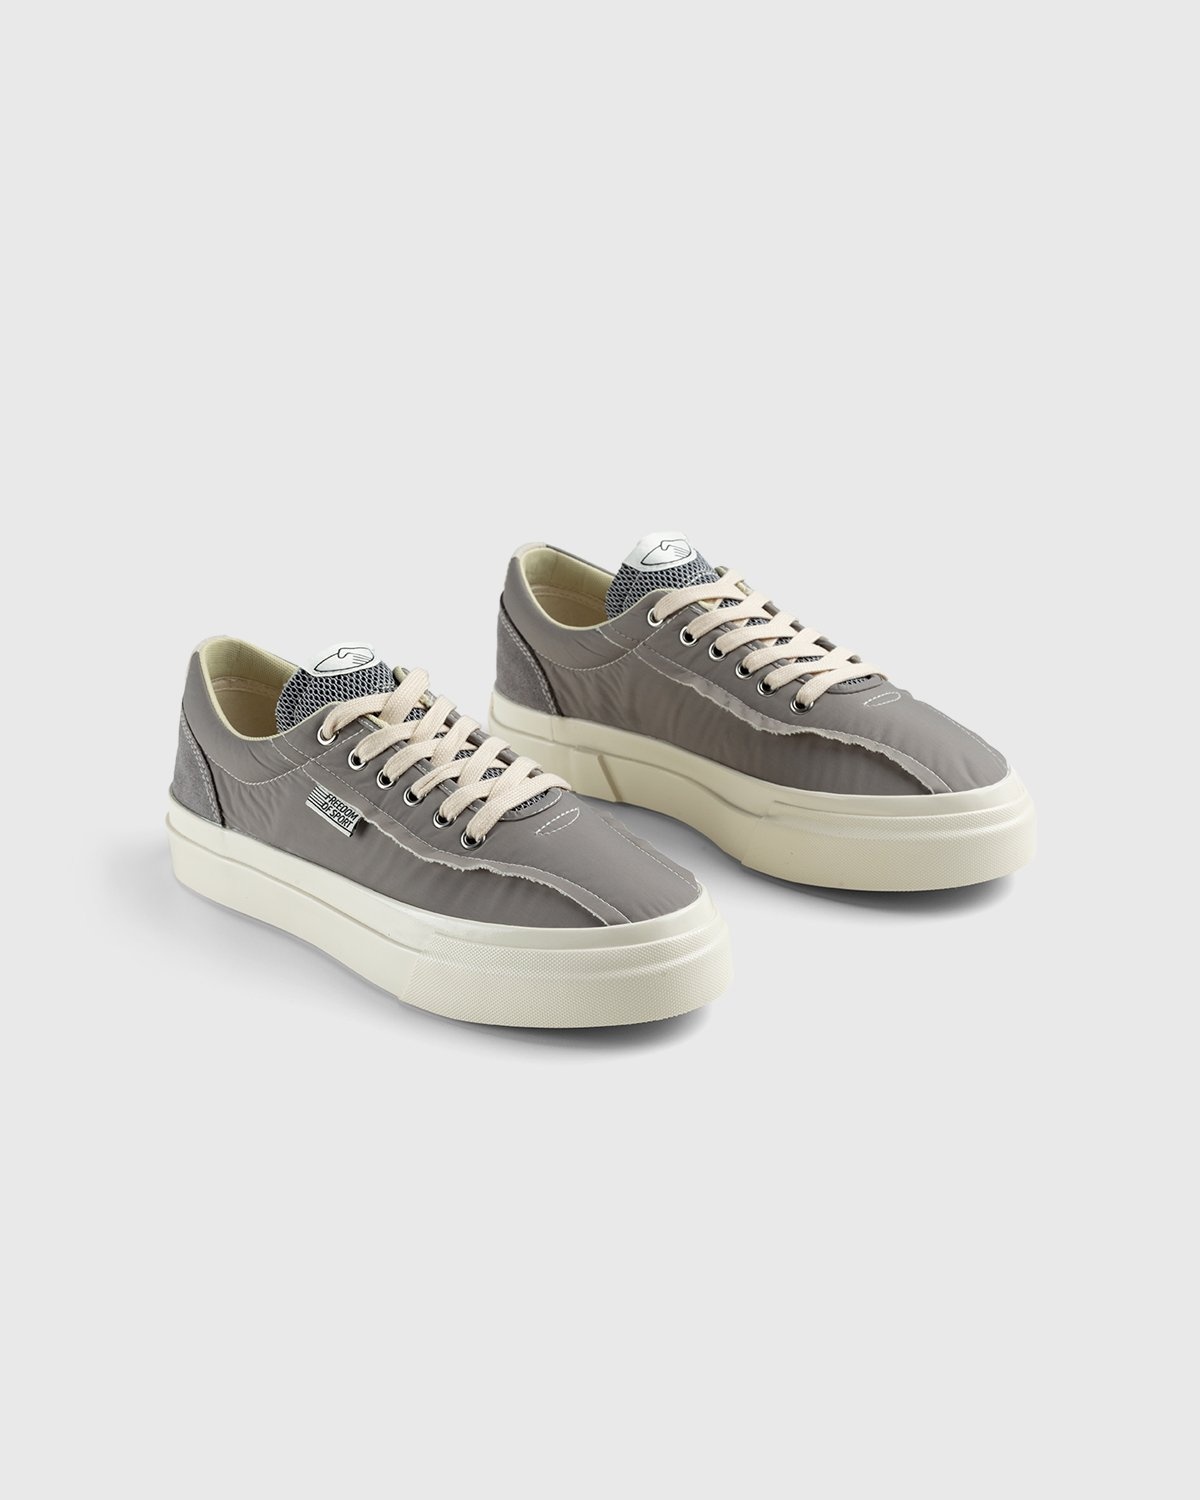 Stepney Workers Club – Dellow Track Raw Nylon Grey - Low Top Sneakers - Grey - Image 3